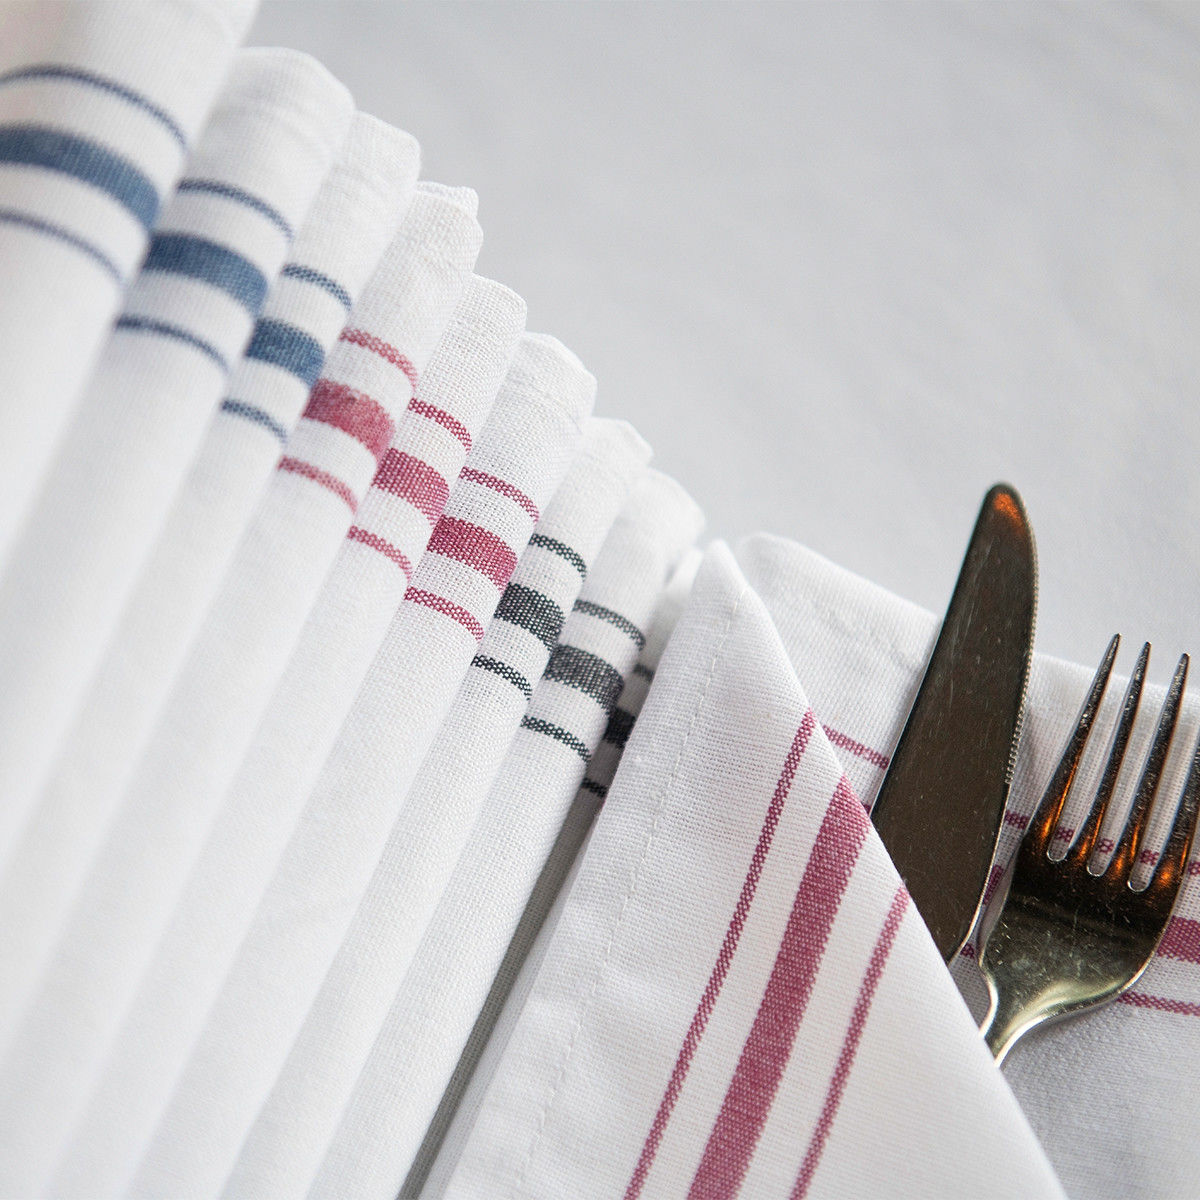 What are the key features of Riegel Cotton Bistro Stripe Napkin?